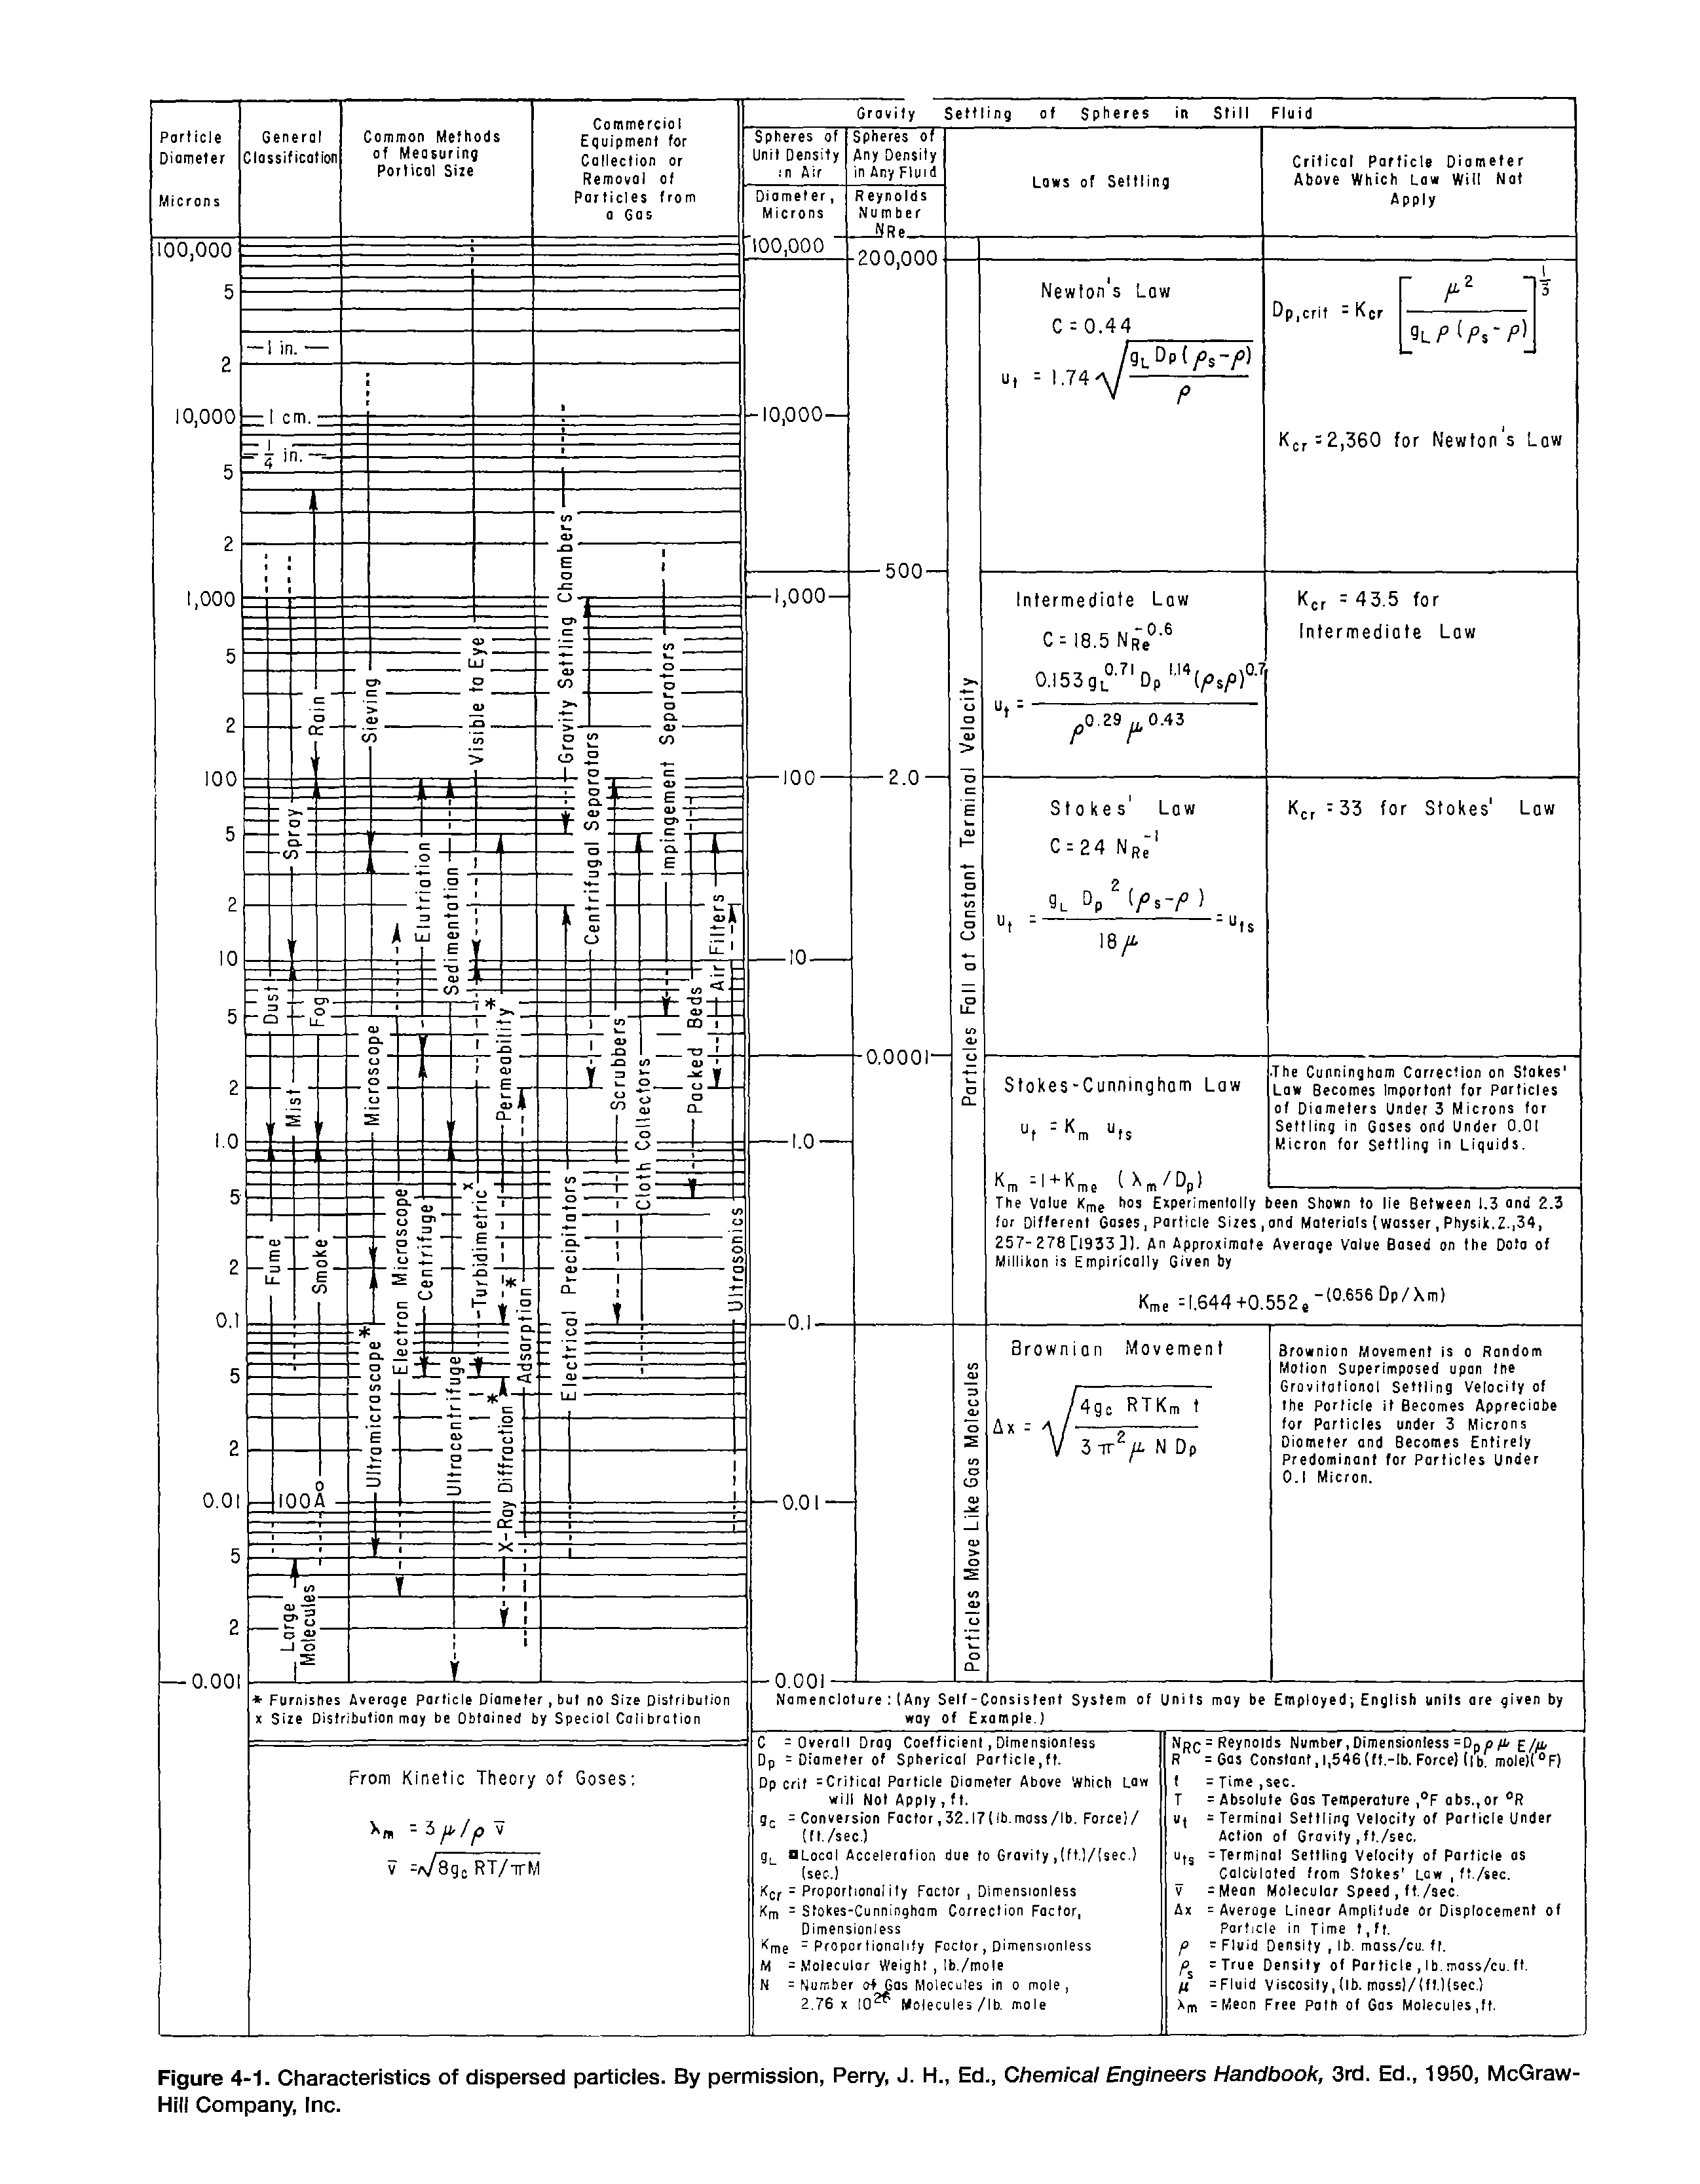 Figure 4-1. Characteristics of dispersed particies. By permission, Perry, J. H., Ed., Chemical Engineers Handbook, 3rd. Ed., 1950, McGraw-Hill Company, Inc.